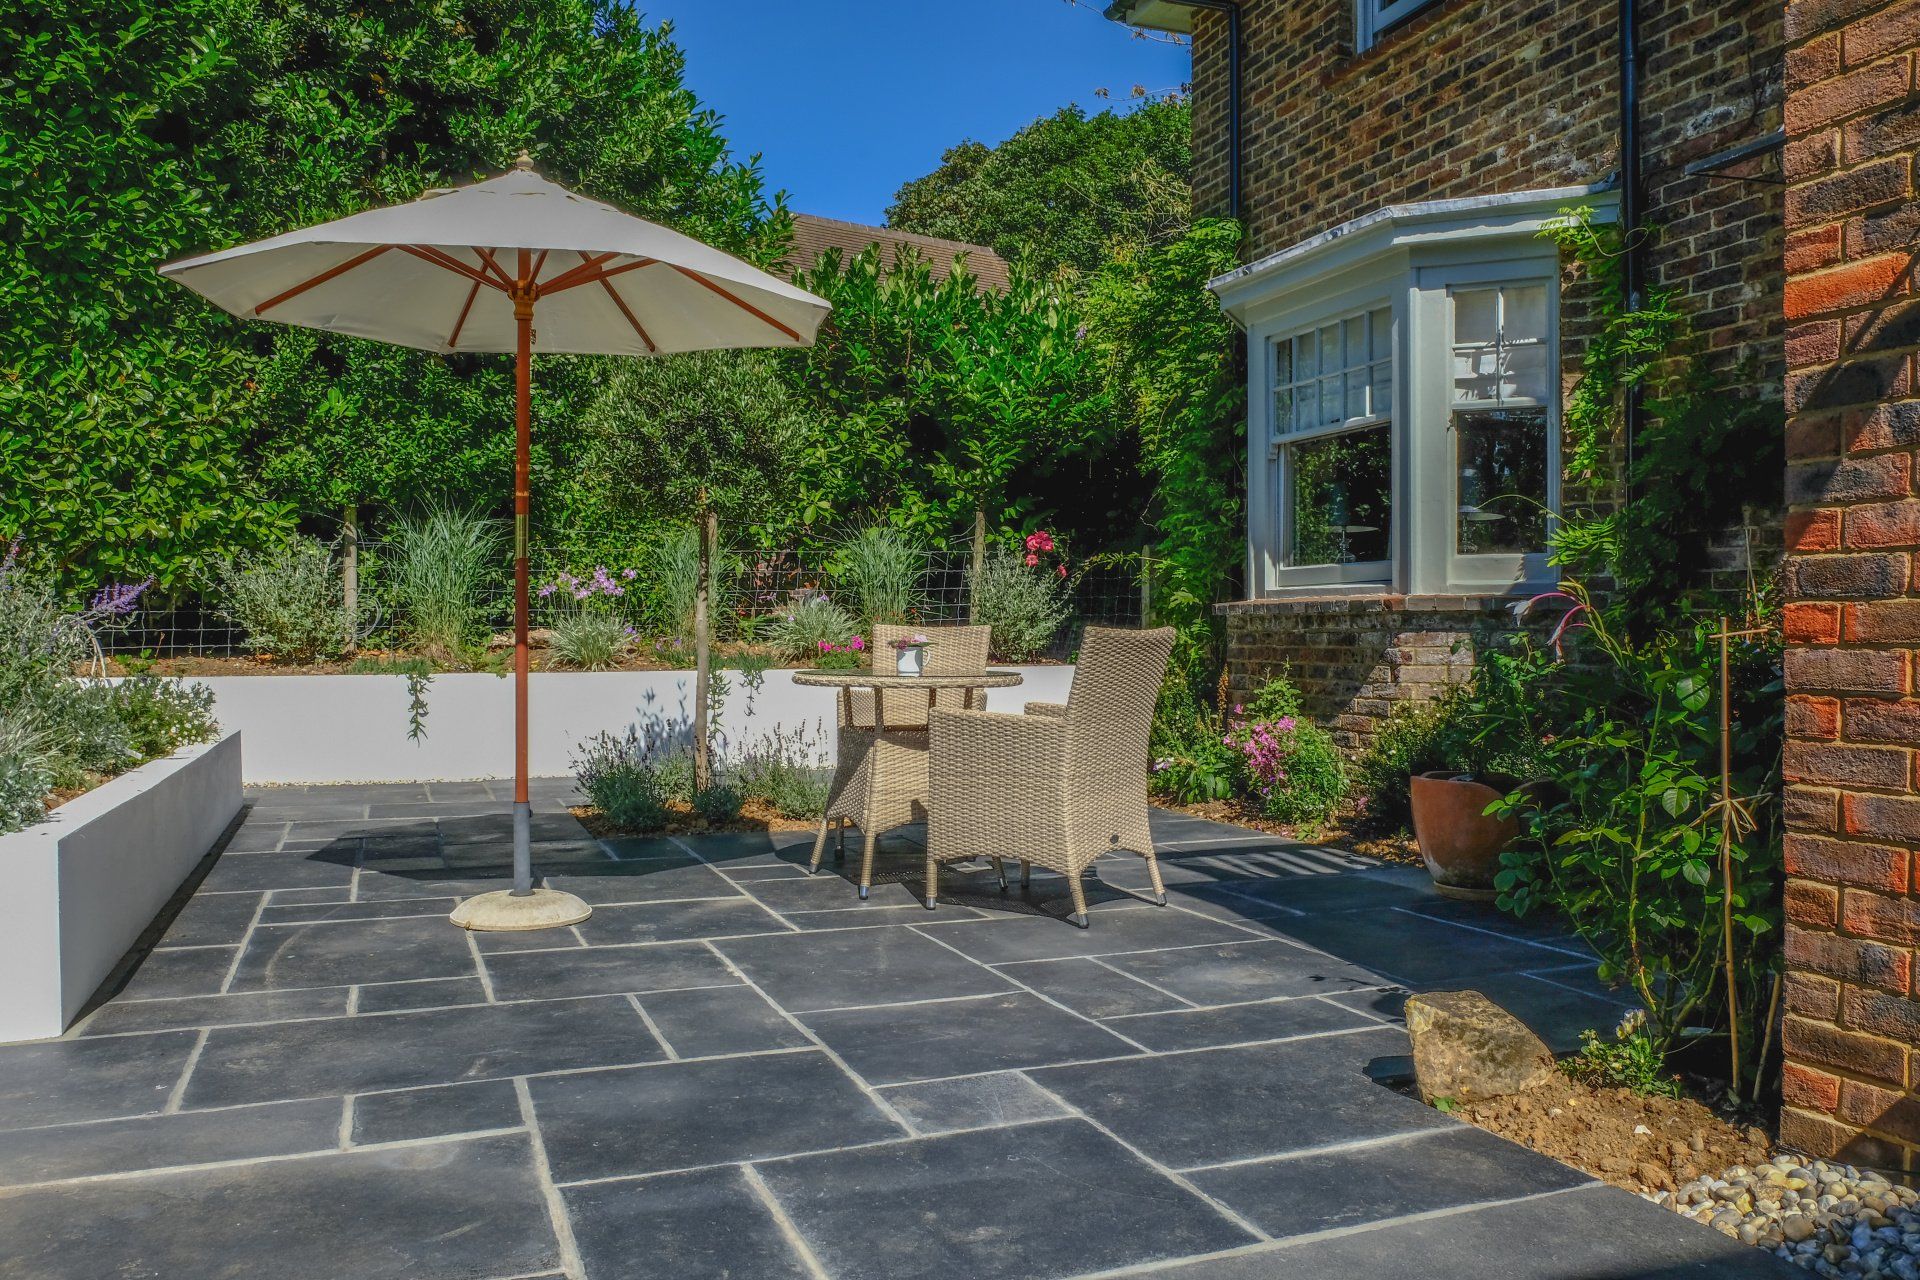 Patios & Driveway builders in Andover by RJ Back Building Services